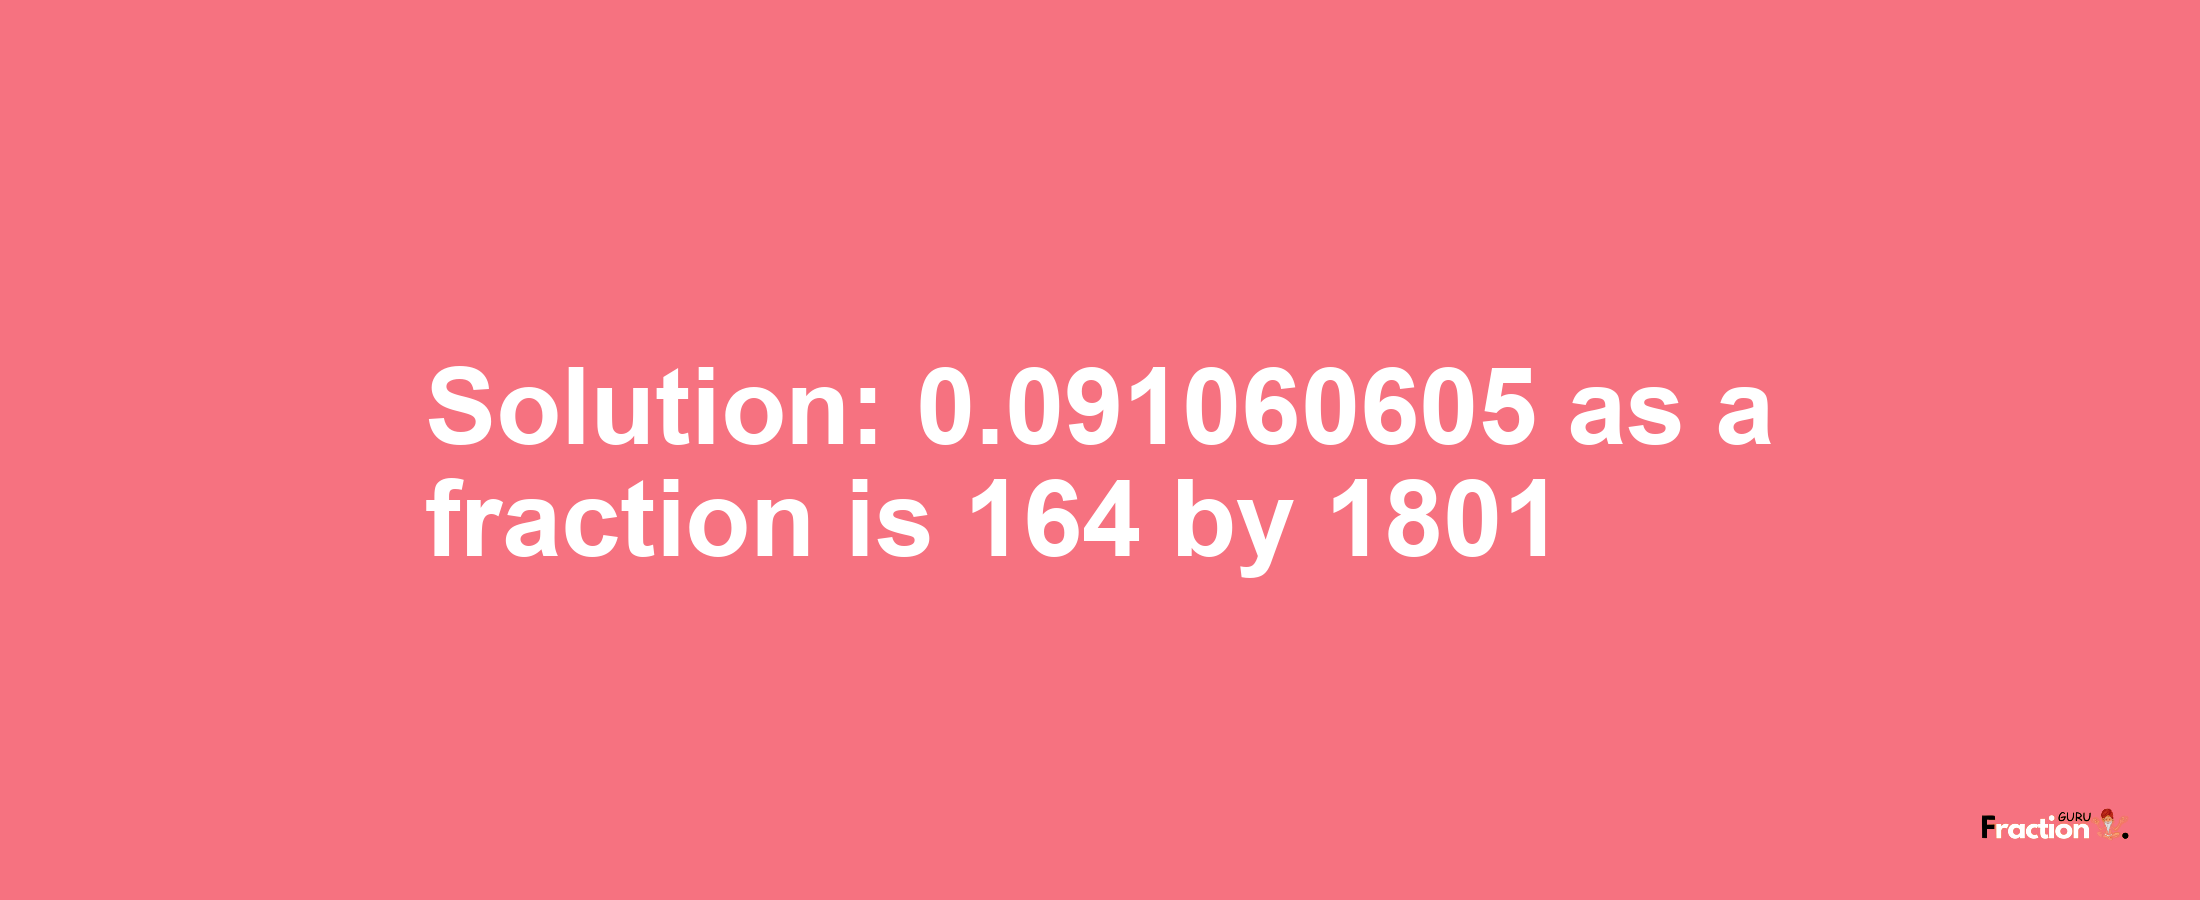 Solution:0.091060605 as a fraction is 164/1801